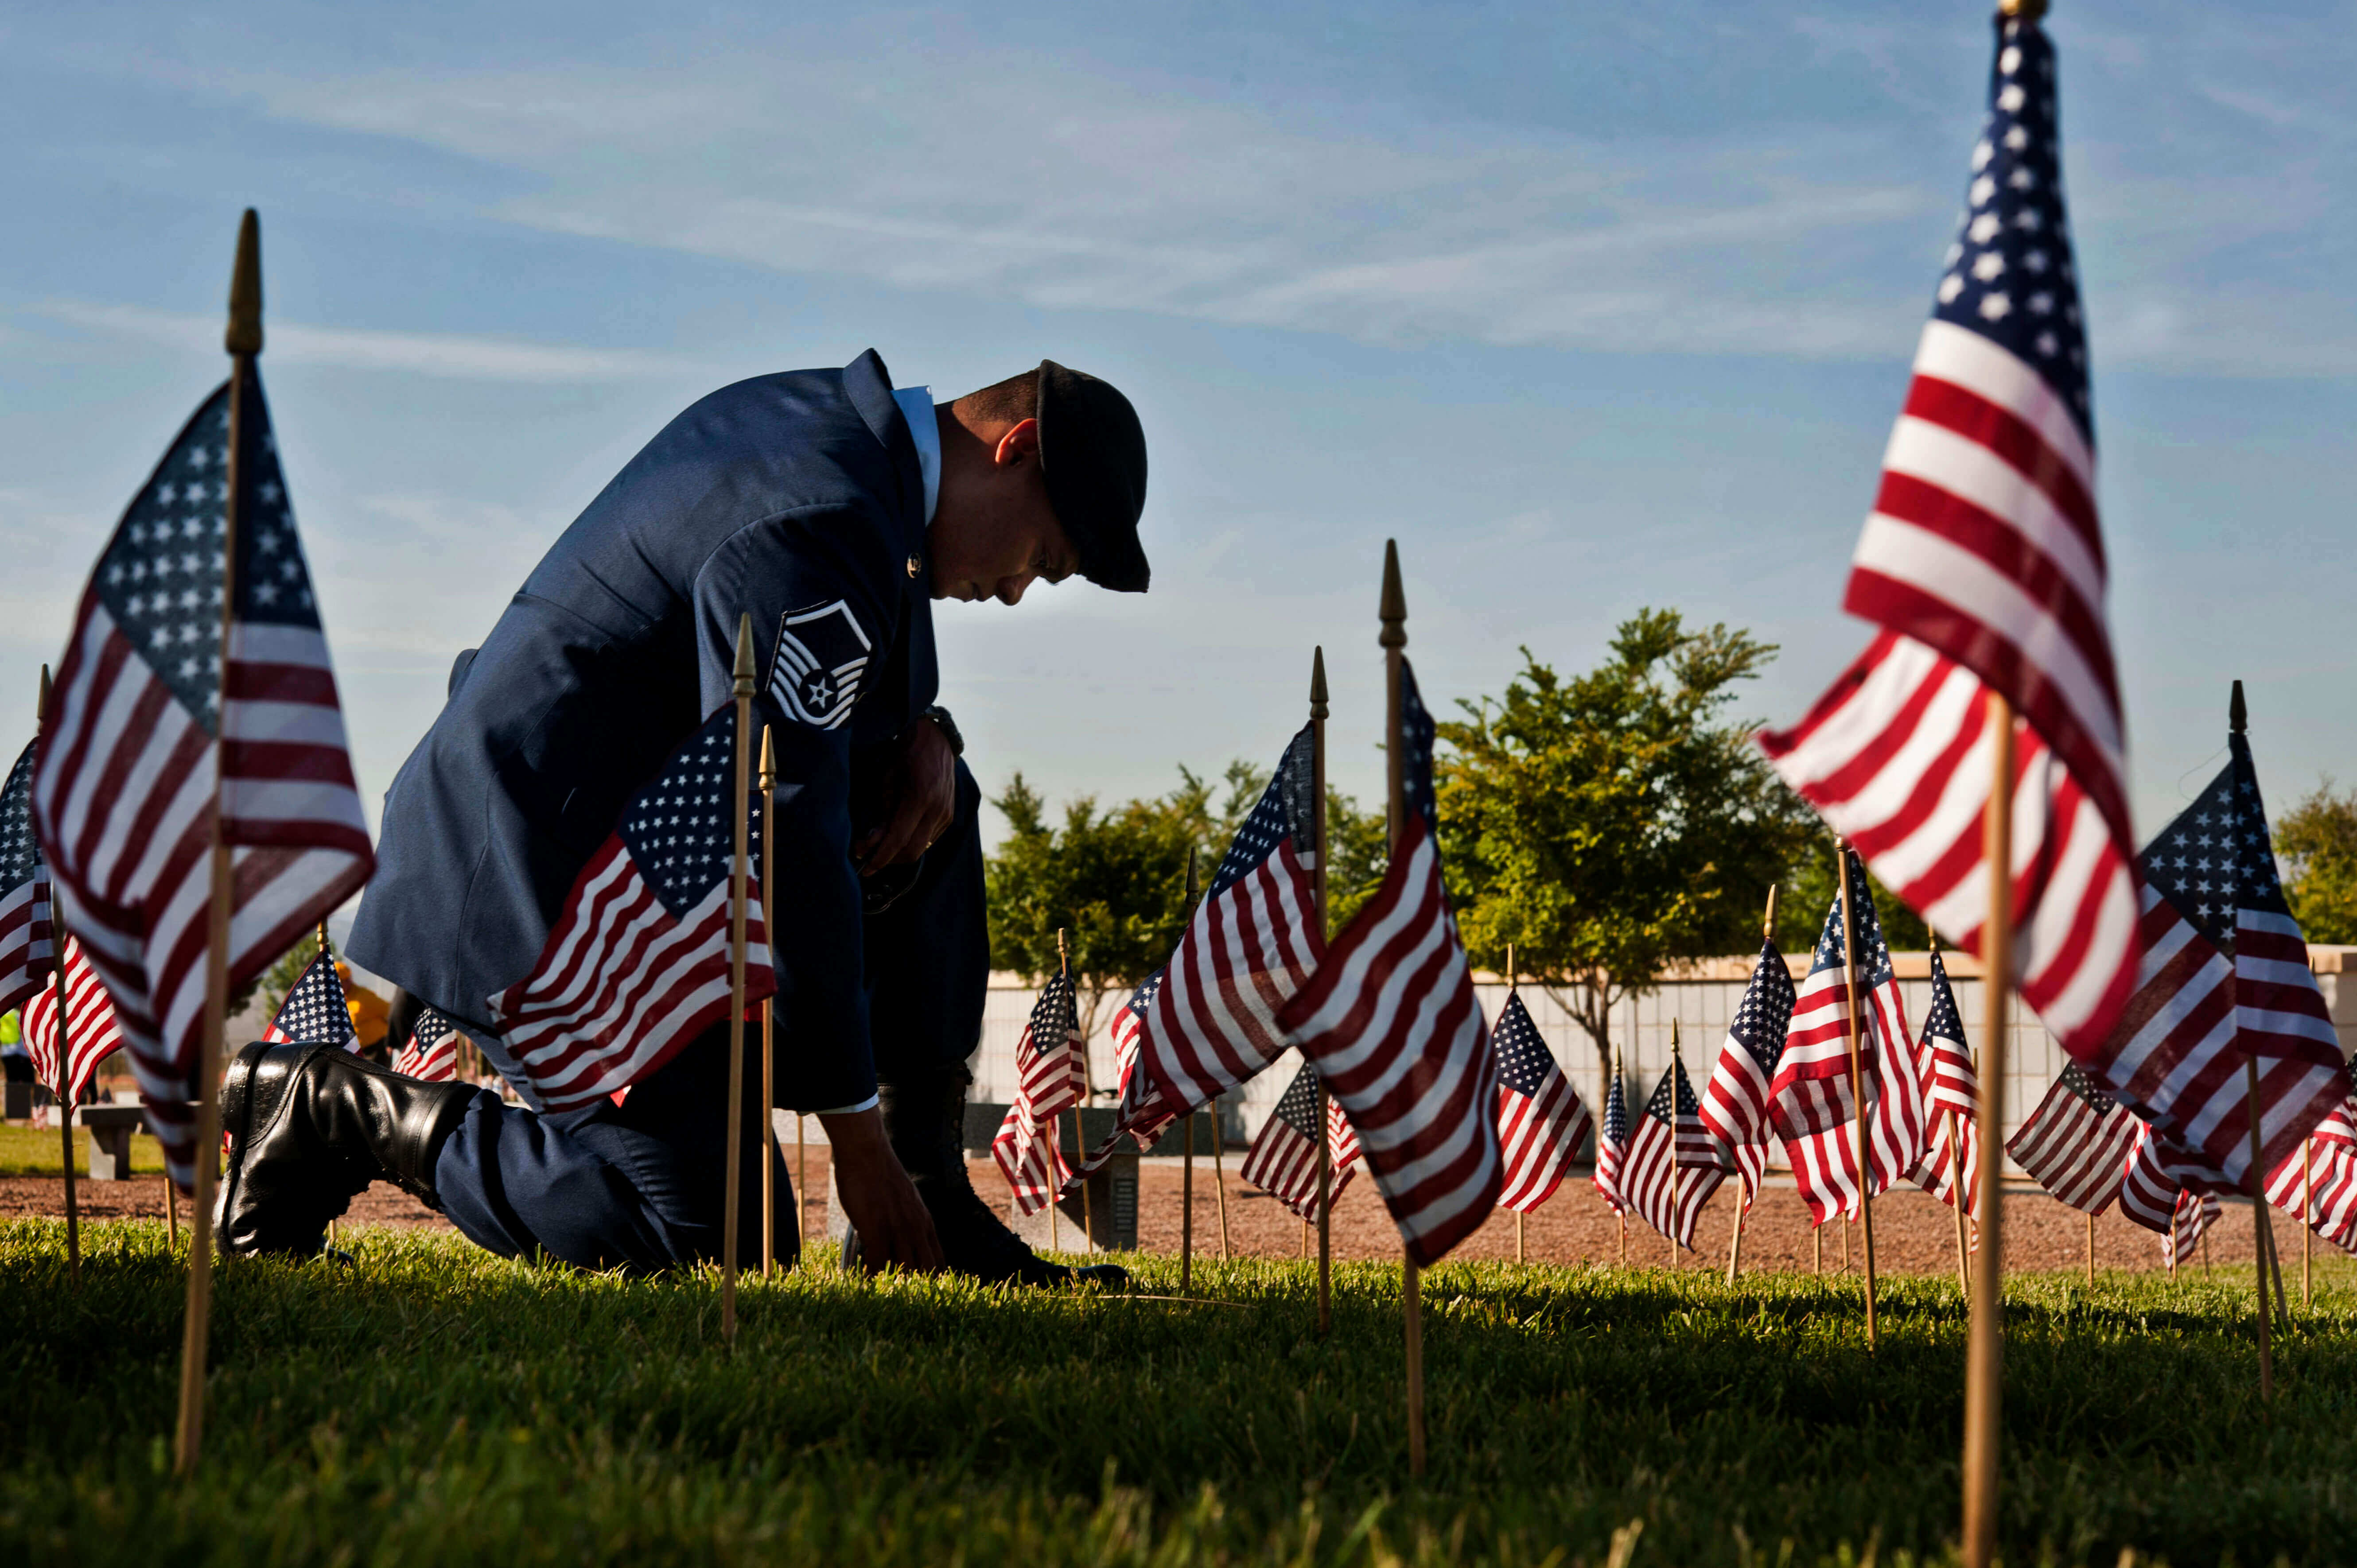 Independence Day service member kneeling on ground, surrounded by small flags